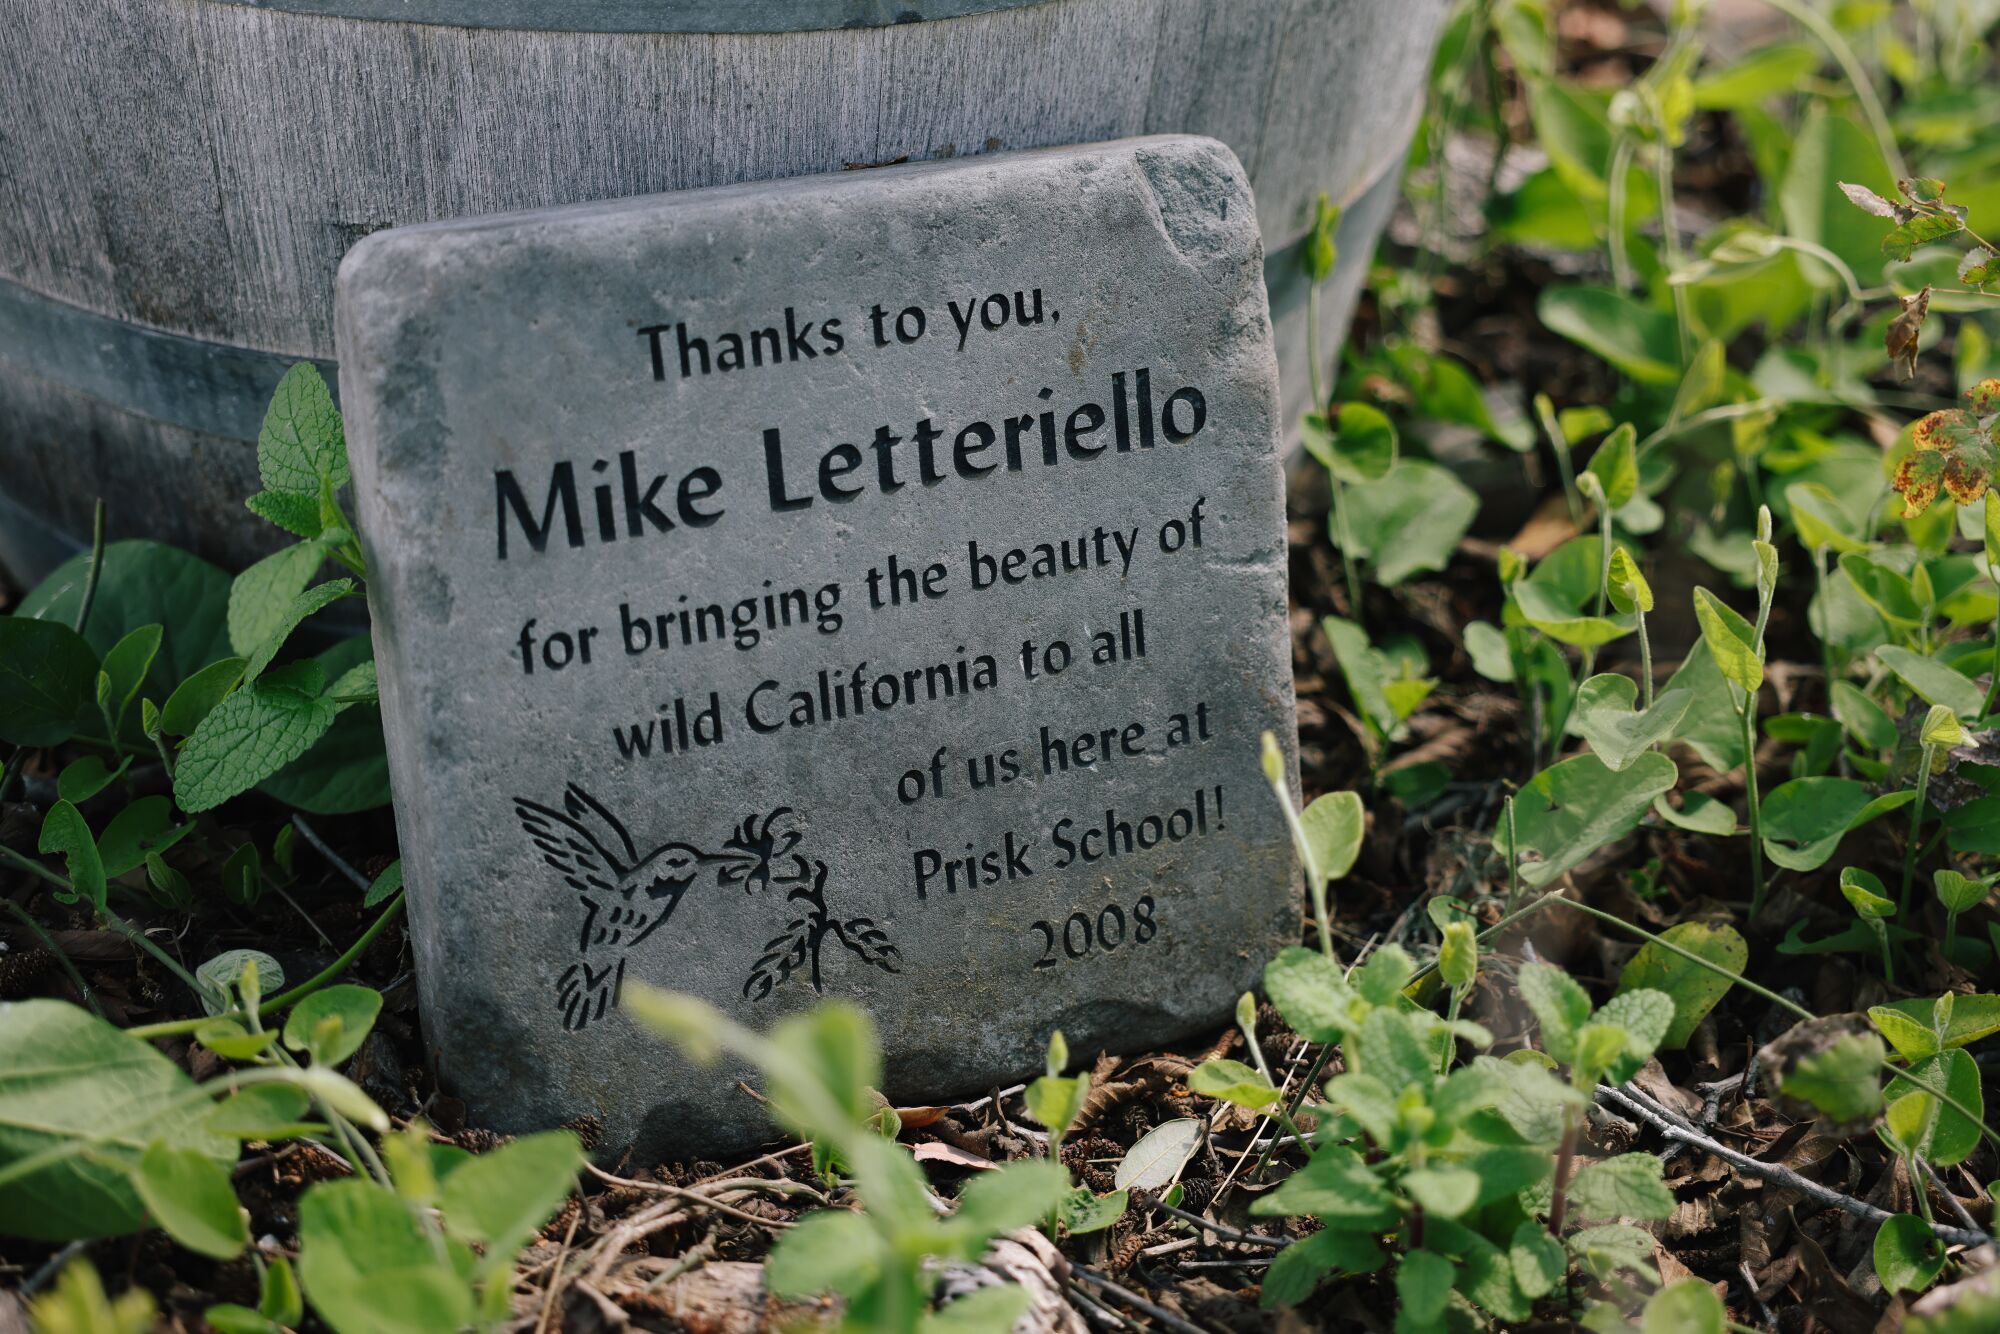 A stone plaque on the ground amid greenery with the words 'Thanks to you, Mike Letteriello"